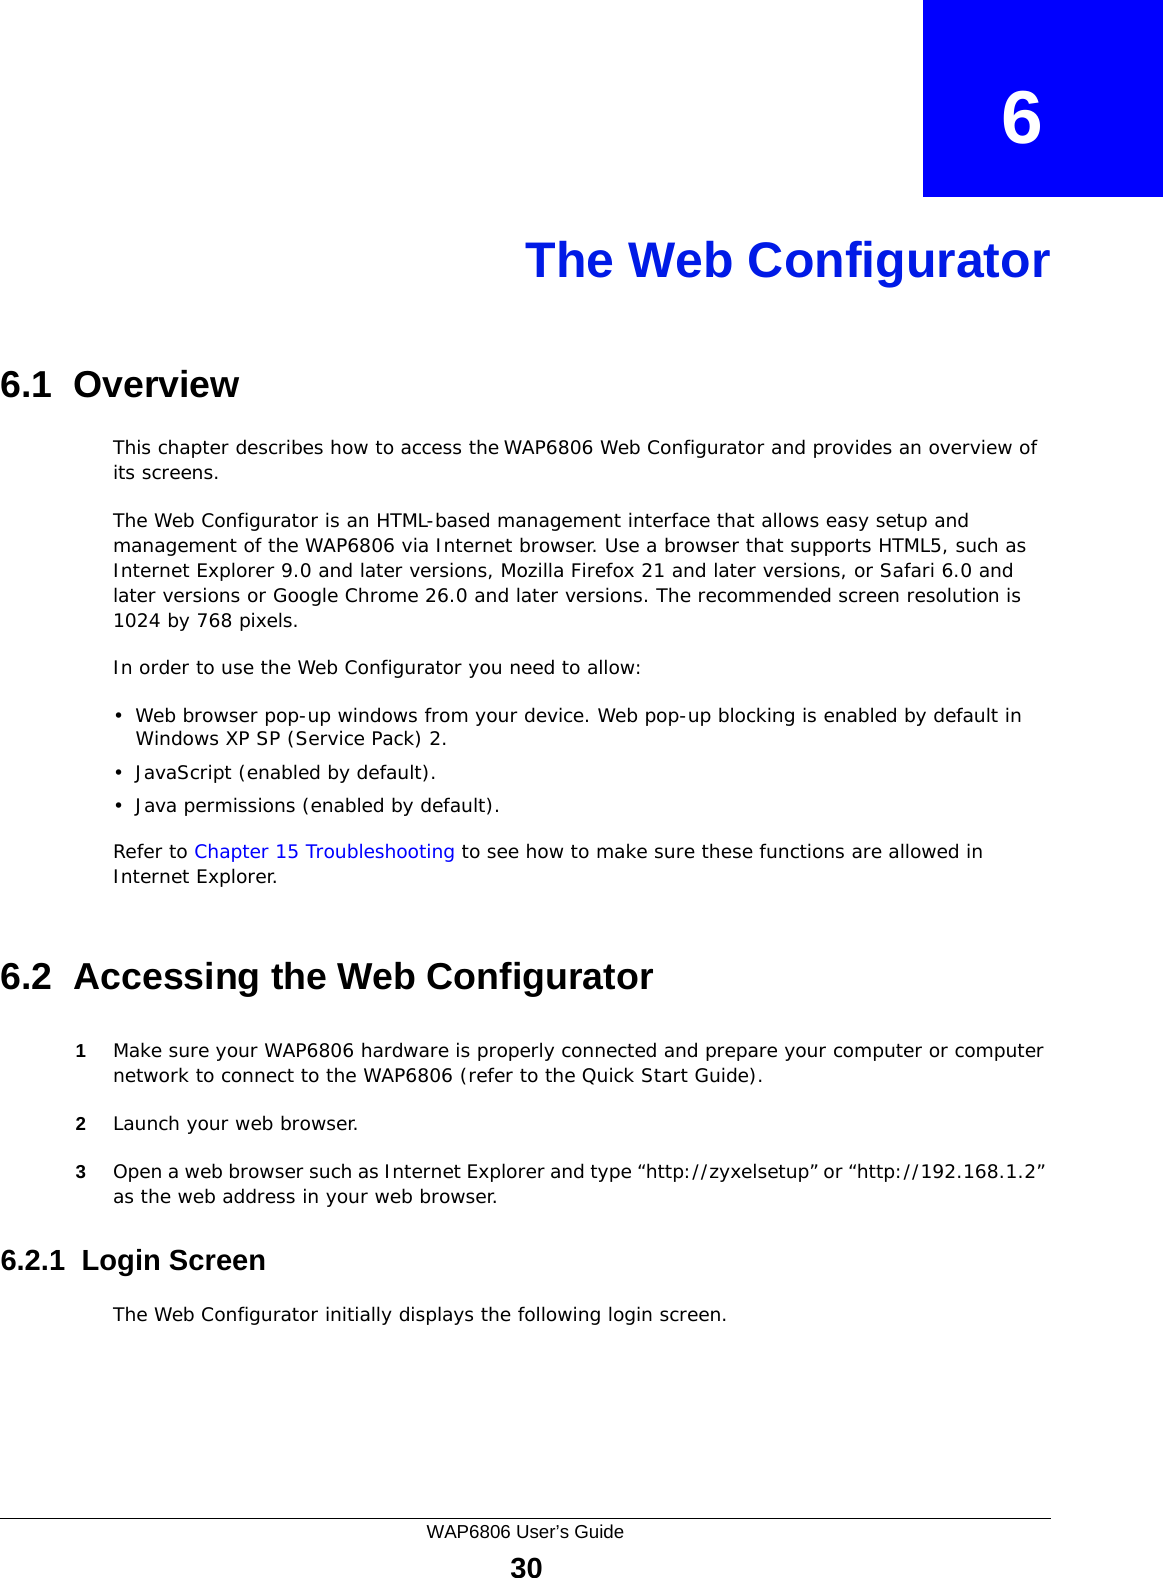 WAP6806 User’s Guide30CHAPTER   6The Web Configurator6.1  OverviewThis chapter describes how to access the WAP6806 Web Configurator and provides an overview of its screens.The Web Configurator is an HTML-based management interface that allows easy setup and management of the WAP6806 via Internet browser. Use a browser that supports HTML5, such as Internet Explorer 9.0 and later versions, Mozilla Firefox 21 and later versions, or Safari 6.0 and later versions or Google Chrome 26.0 and later versions. The recommended screen resolution is 1024 by 768 pixels.In order to use the Web Configurator you need to allow:• Web browser pop-up windows from your device. Web pop-up blocking is enabled by default in Windows XP SP (Service Pack) 2.• JavaScript (enabled by default).• Java permissions (enabled by default).Refer to Chapter 15 Troubleshooting to see how to make sure these functions are allowed in Internet Explorer.6.2  Accessing the Web Configurator1Make sure your WAP6806 hardware is properly connected and prepare your computer or computer network to connect to the WAP6806 (refer to the Quick Start Guide).2Launch your web browser.3Open a web browser such as Internet Explorer and type “http://zyxelsetup” or “http://192.168.1.2” as the web address in your web browser.6.2.1  Login ScreenThe Web Configurator initially displays the following login screen.